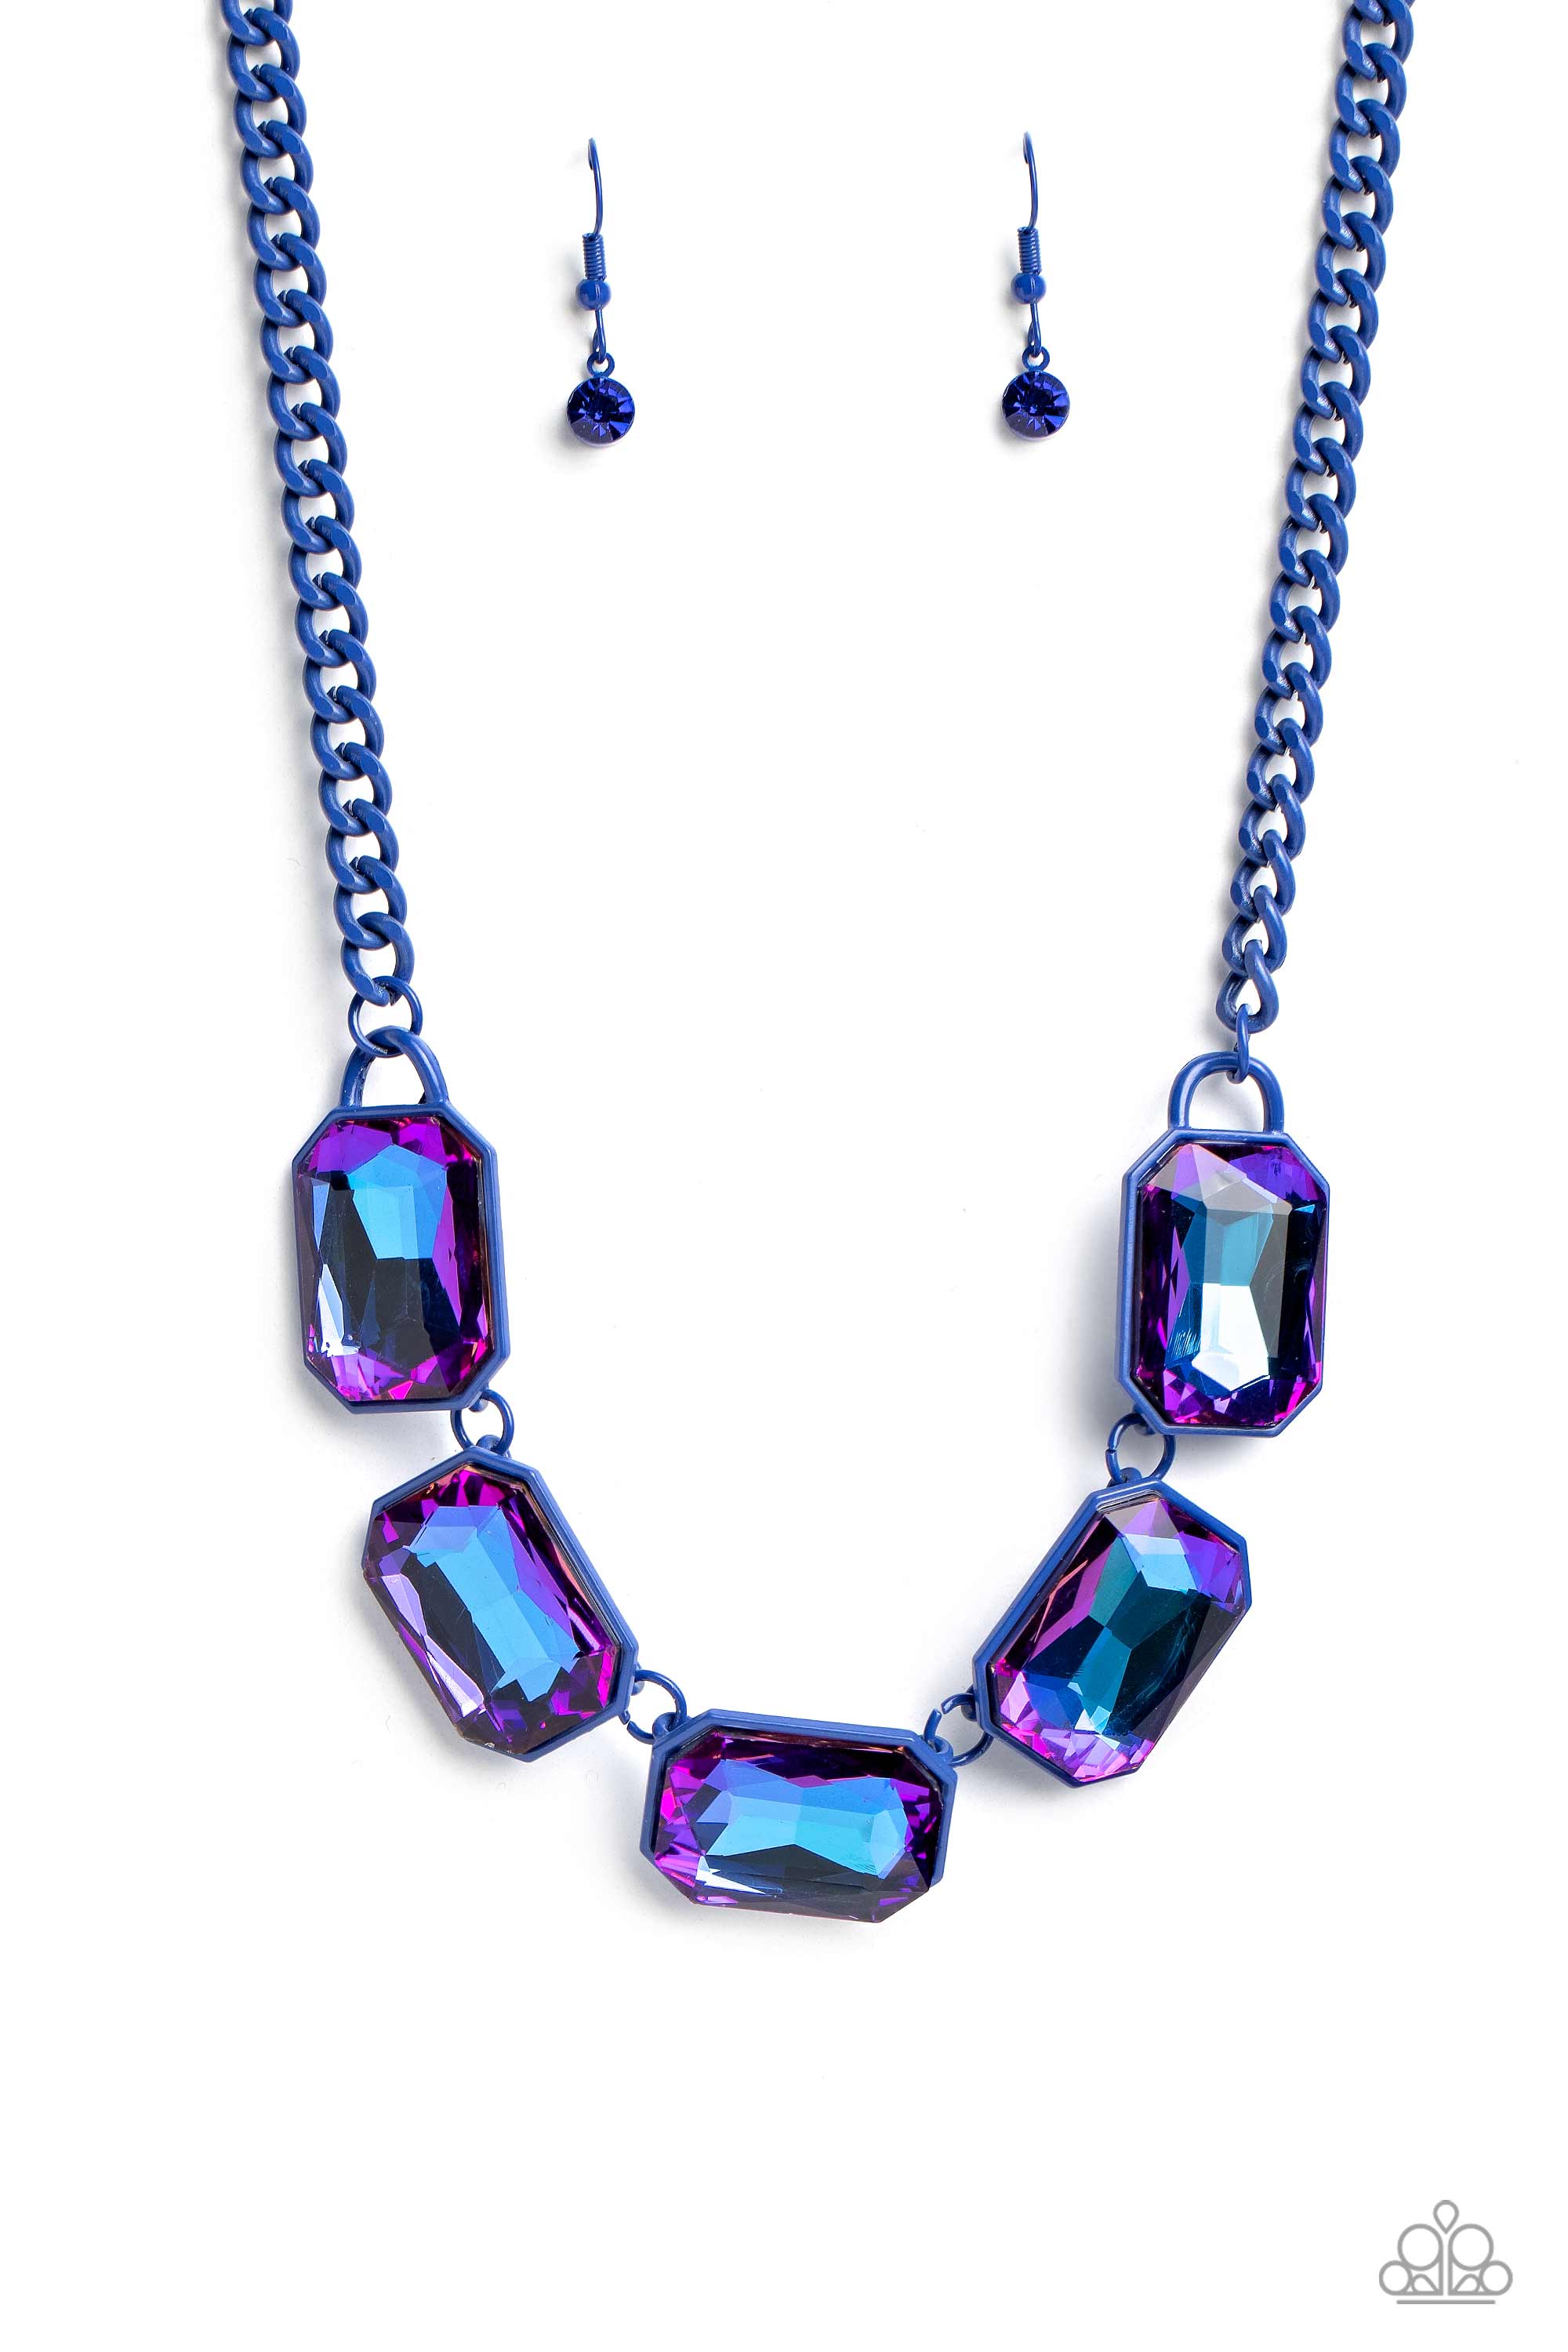 Emerald City Couture Blue UV Shimmer Rhinestone Necklace - Paparazzi Accessories- lightbox - CarasShop.com - $5 Jewelry by Cara Jewels